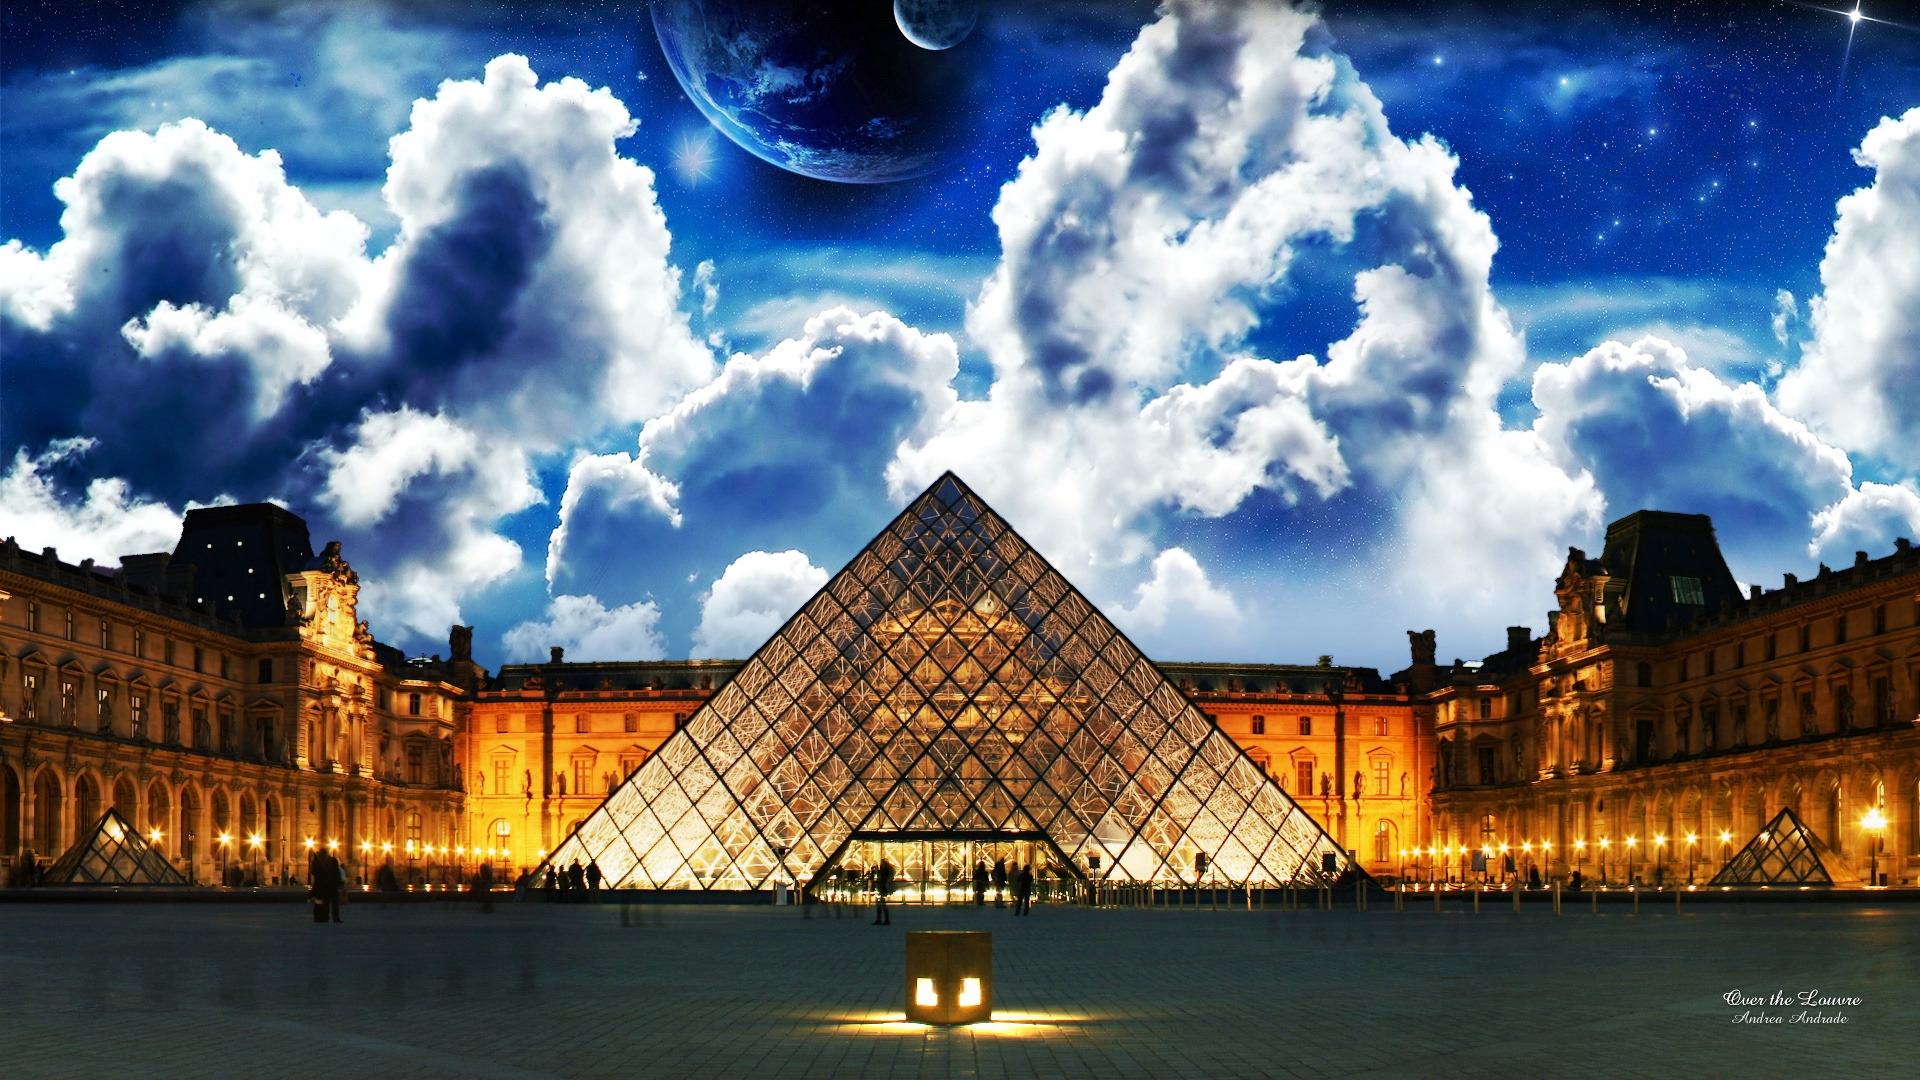 Over the Louvre for 1920 x 1080 HDTV 1080p resolution